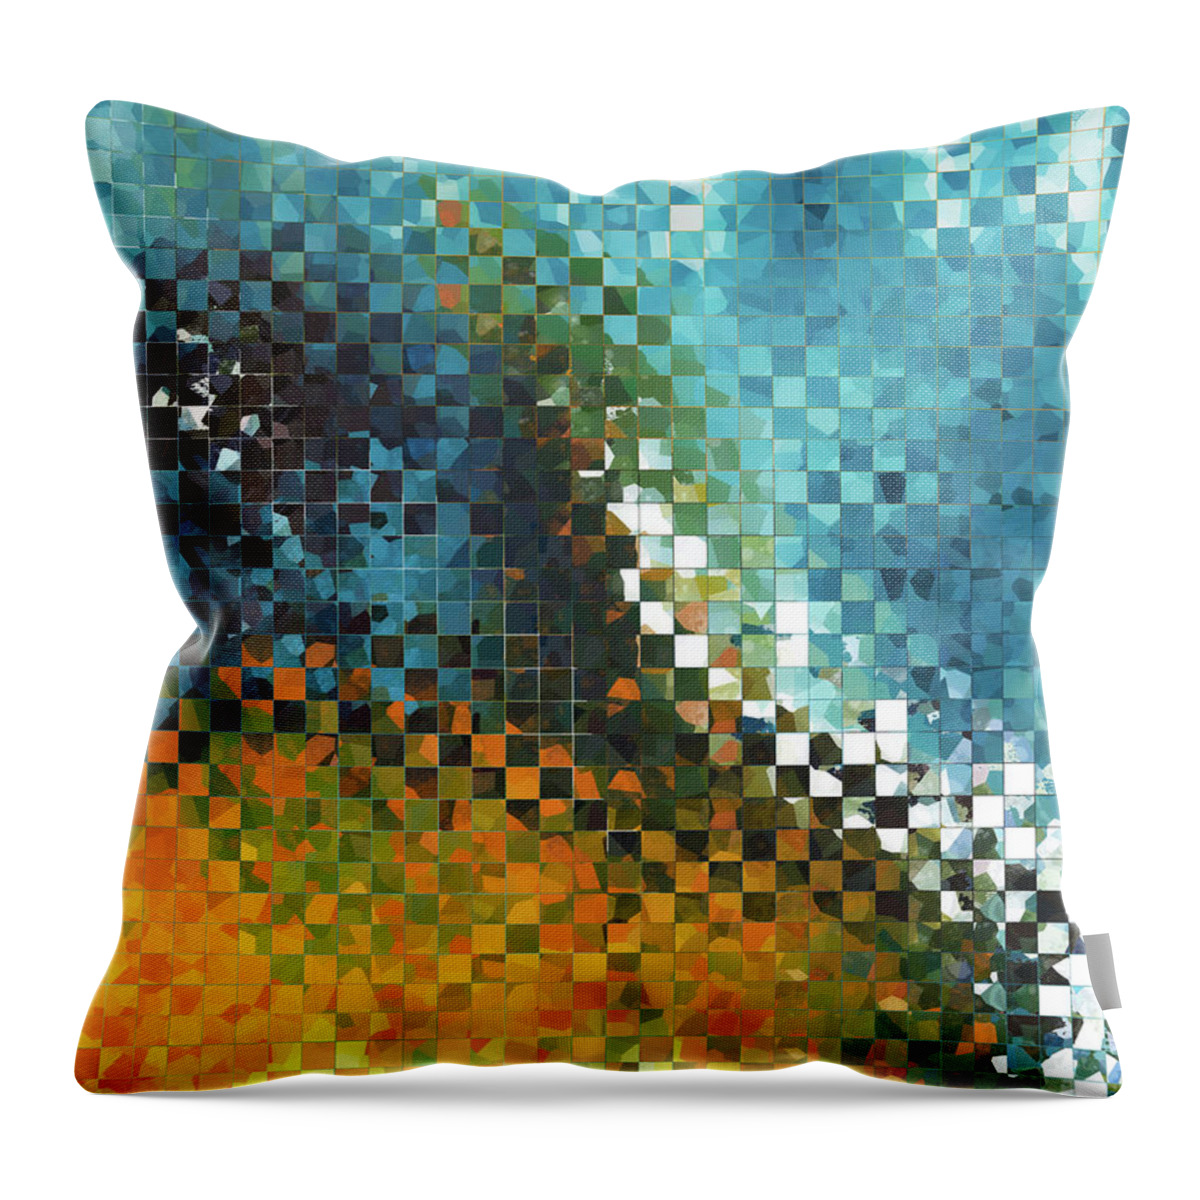 Abstract Throw Pillow featuring the painting Abstract Art - Pieces 9 - Sharon Cummings by Sharon Cummings